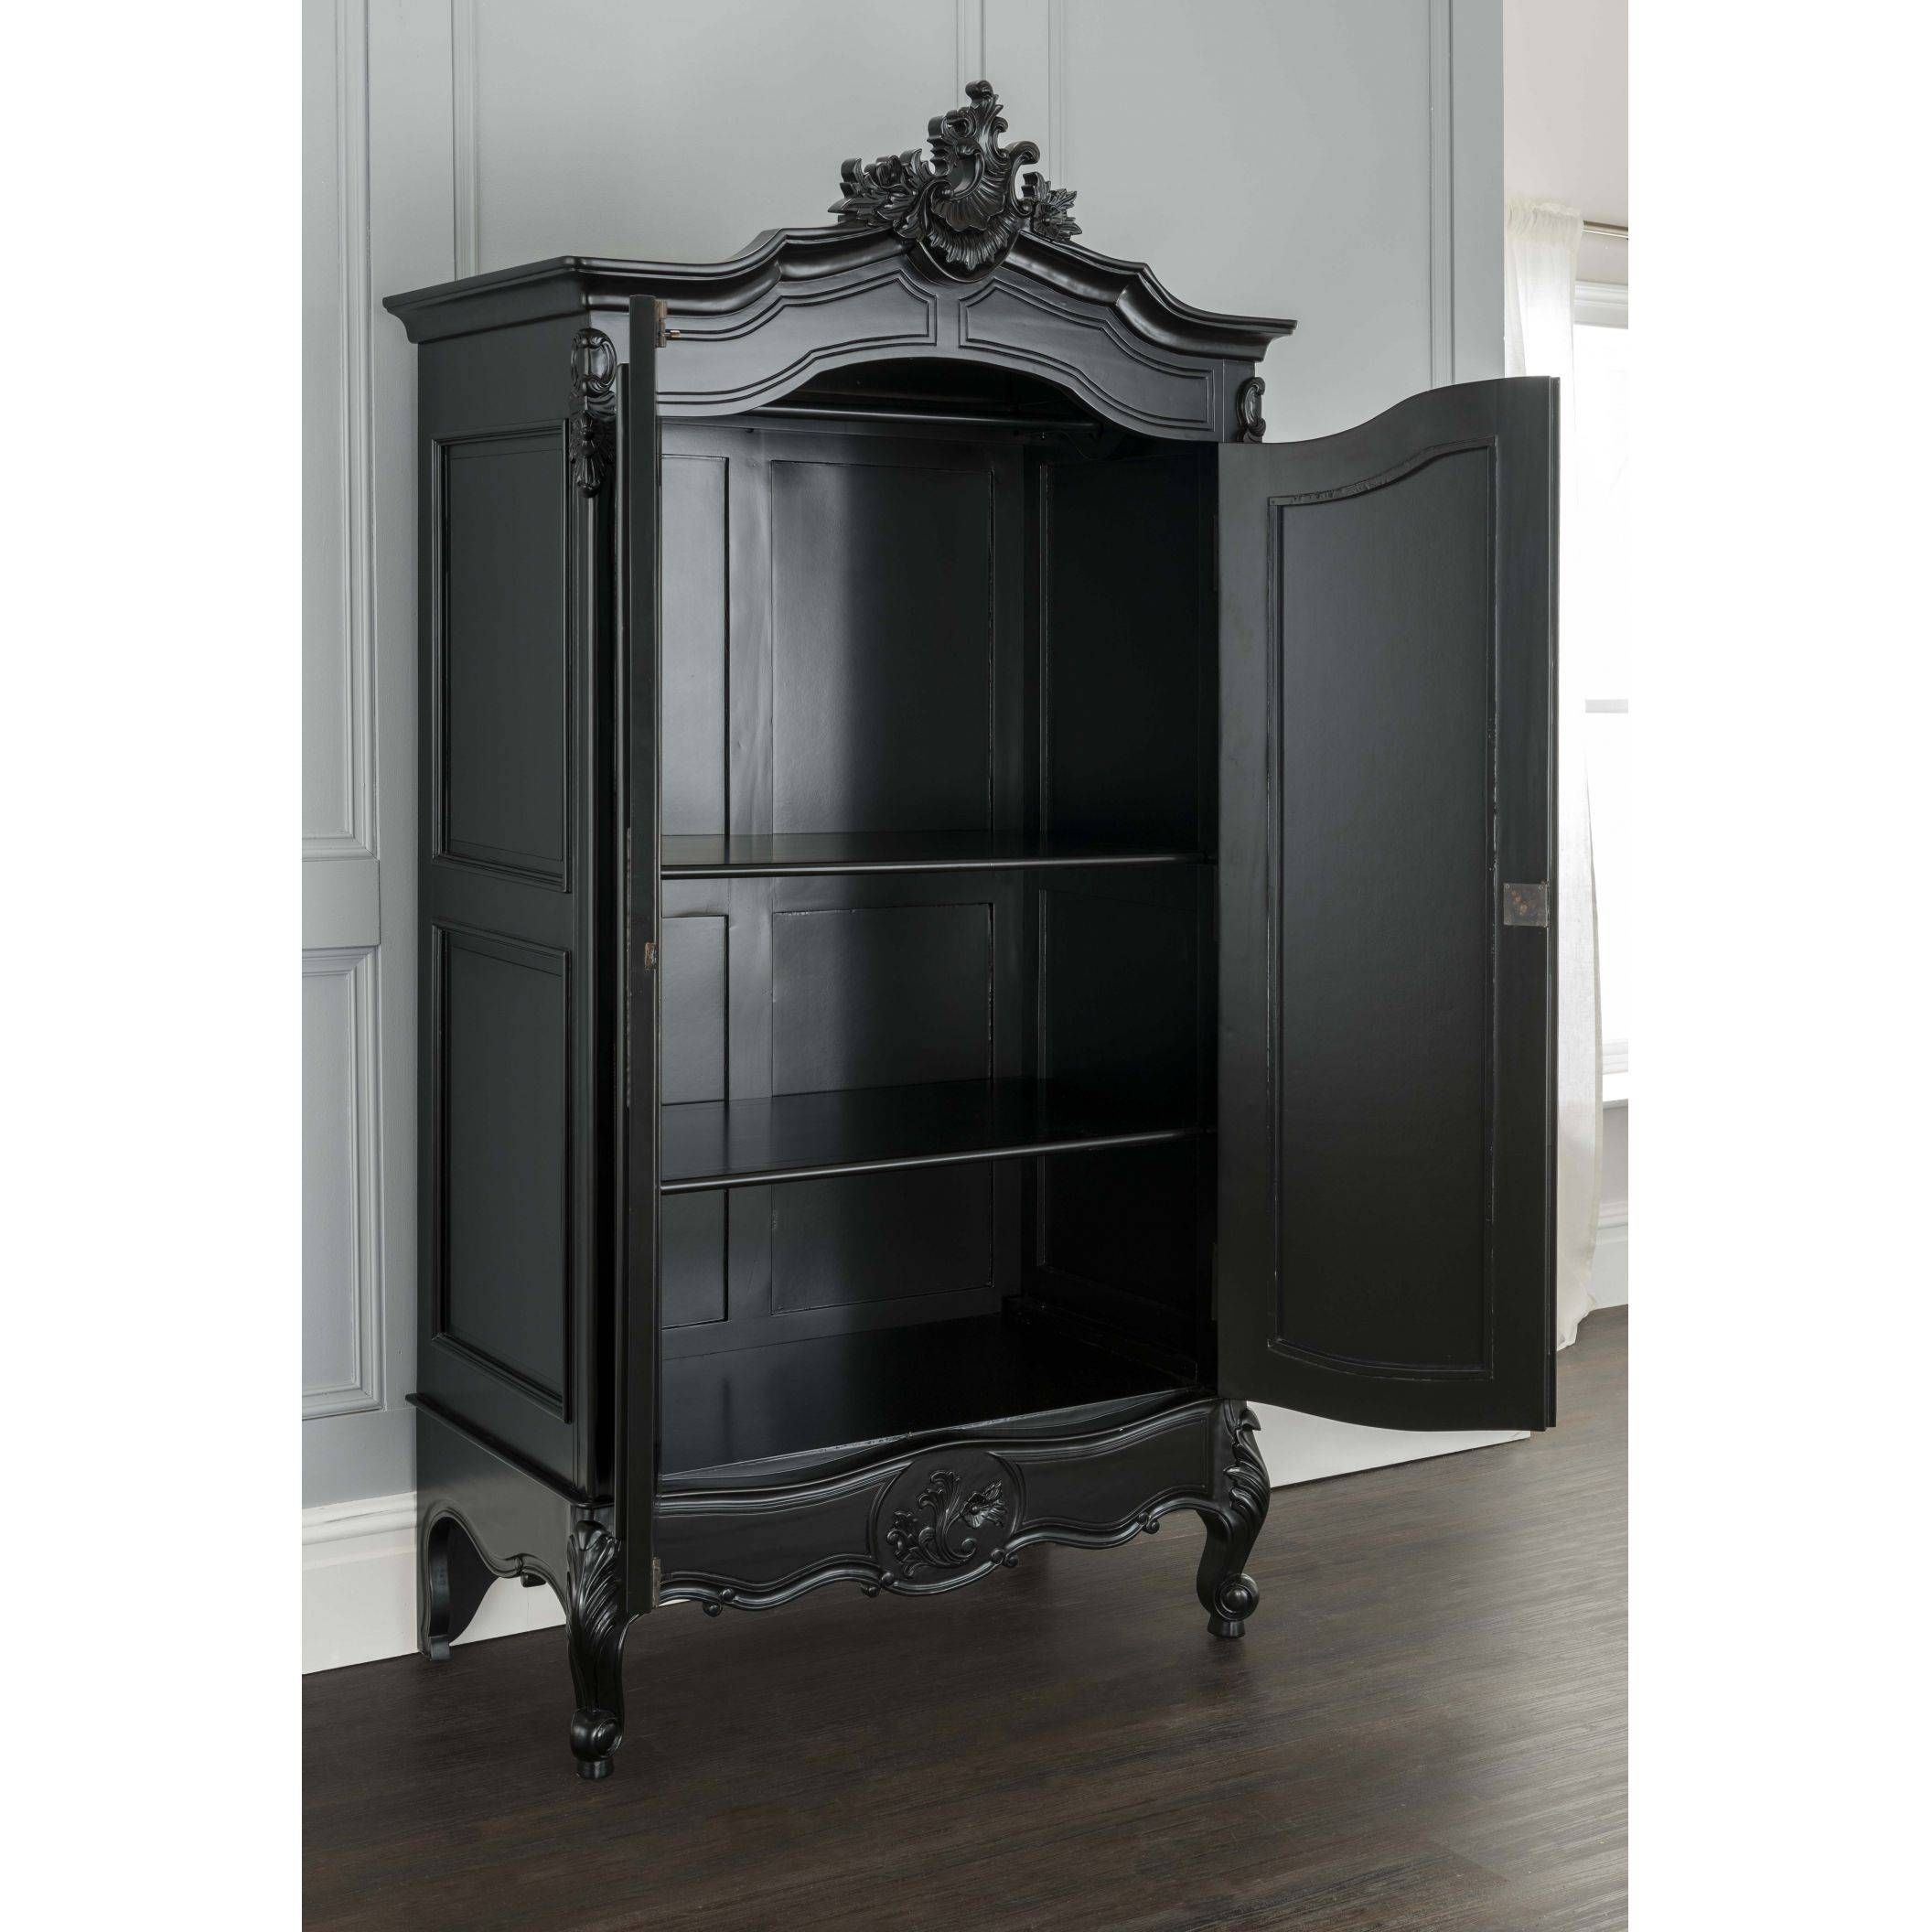 La Rochelle Antique French Wardrobe | Black Furniture Collection Pertaining To Black French Wardrobes (Photo 3 of 15)